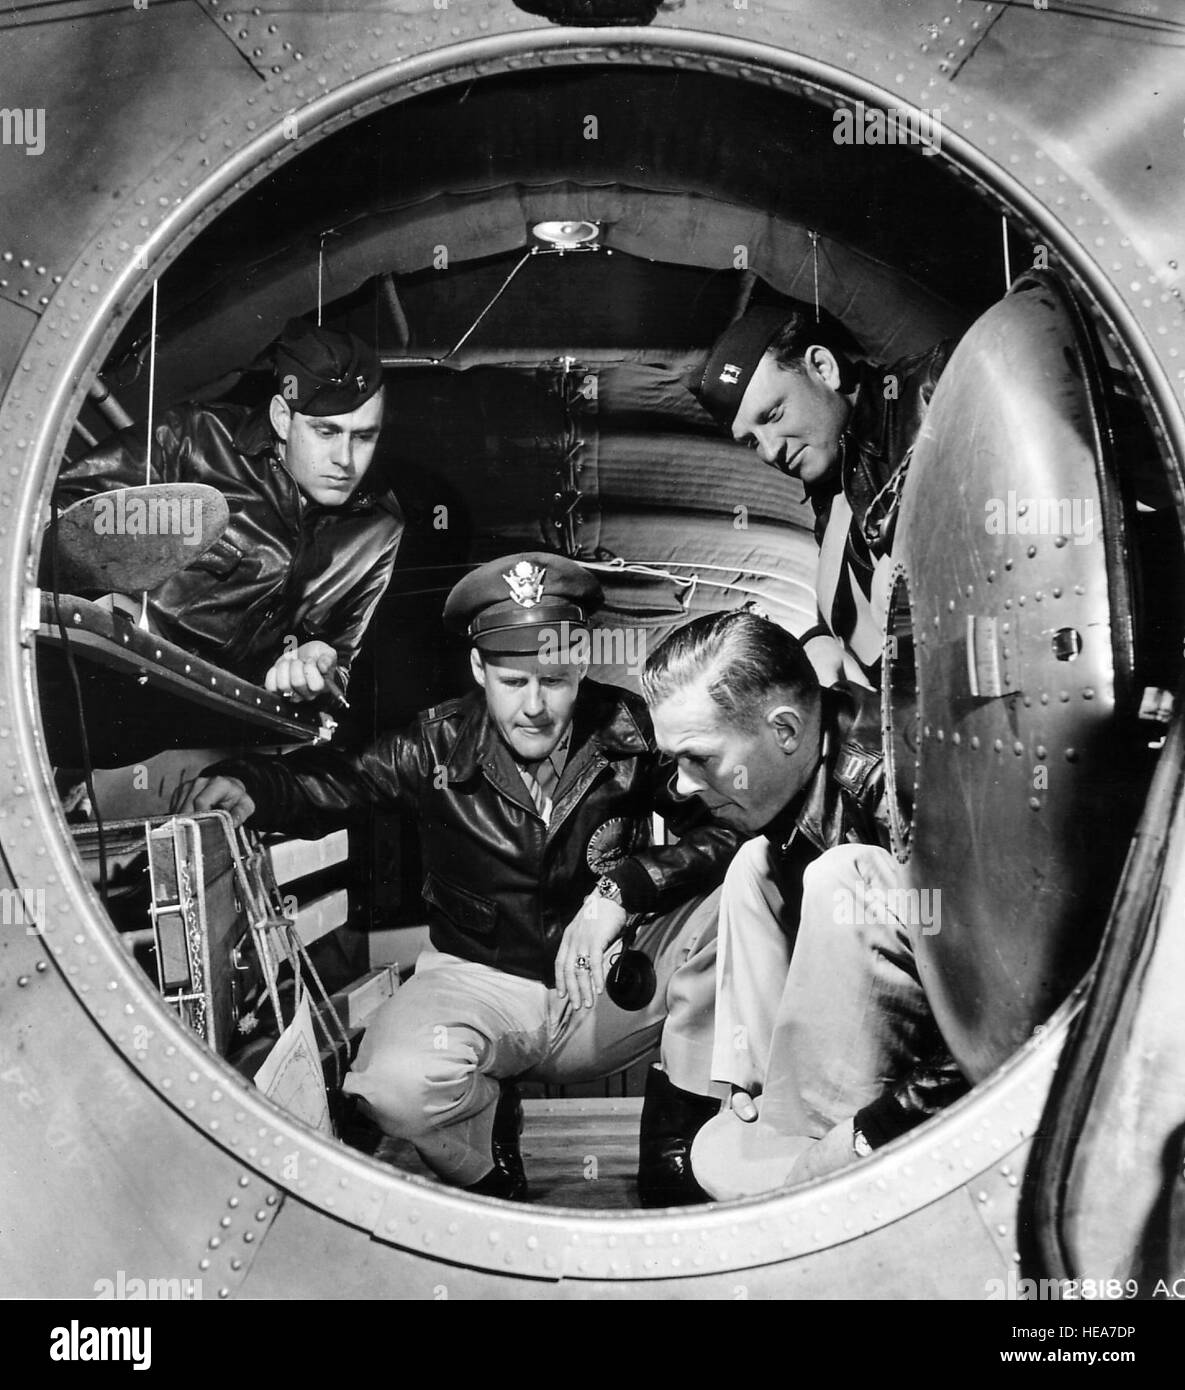 Interior photo of the B-29 Superfortress bomber. June 1944 Shown is the rear pressurized cabin, equipped with four bunks to give crew members a chance for rest on a long mission.  This is an important factor in combating flight fatigue.  The B-29 was first reported in action on June 5, 1944, in an attack on railway yards at Bangkok, Siam, and on June 15 the first raid was made in Japan from bases in China. Following that date, attacks on the Japanese mainland were steadily stepped up, mainly from bases in the Marianas and in Guam, with forces up to 450 and 500 Superfortresses. Stock Photo